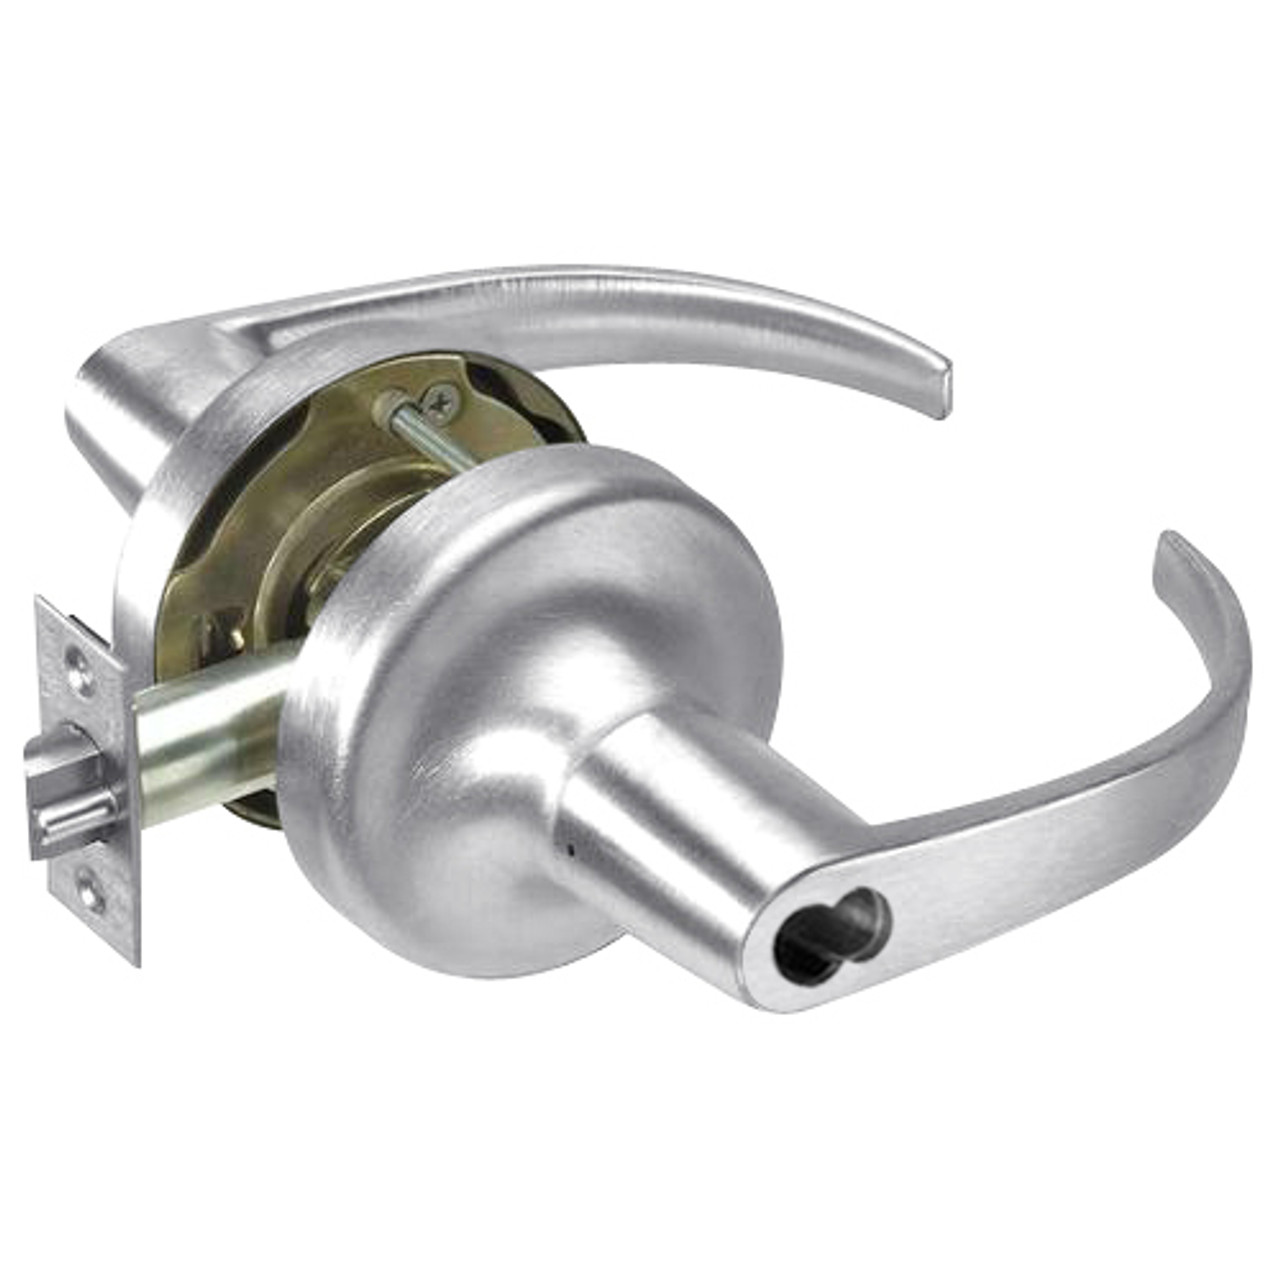 B-PB5308LN-625 Yale 5300LN Series Single Cylinder Classroom Cylindrical Lock with Pacific Beach Lever Prepped for SFIC in Bright Chrome